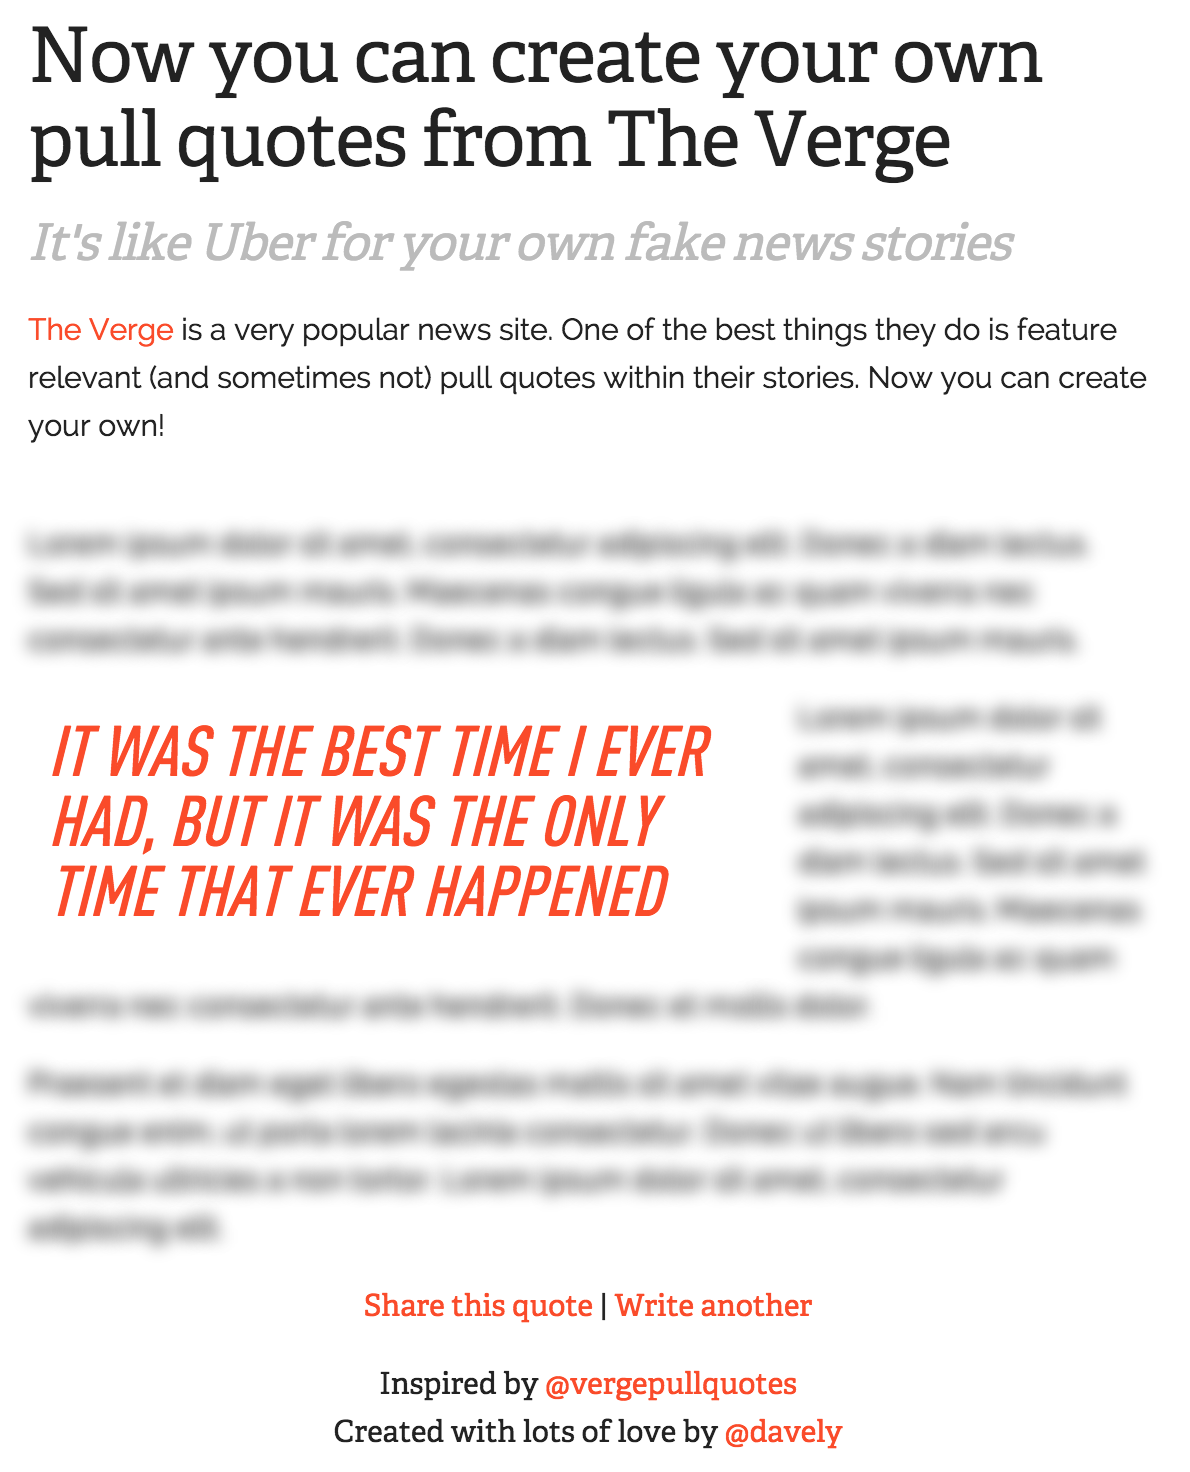 - daveschumaker/Verge-Pull-Quote-Generator: Generate your own fancy pull quotes that look like they were featured on The Verge!